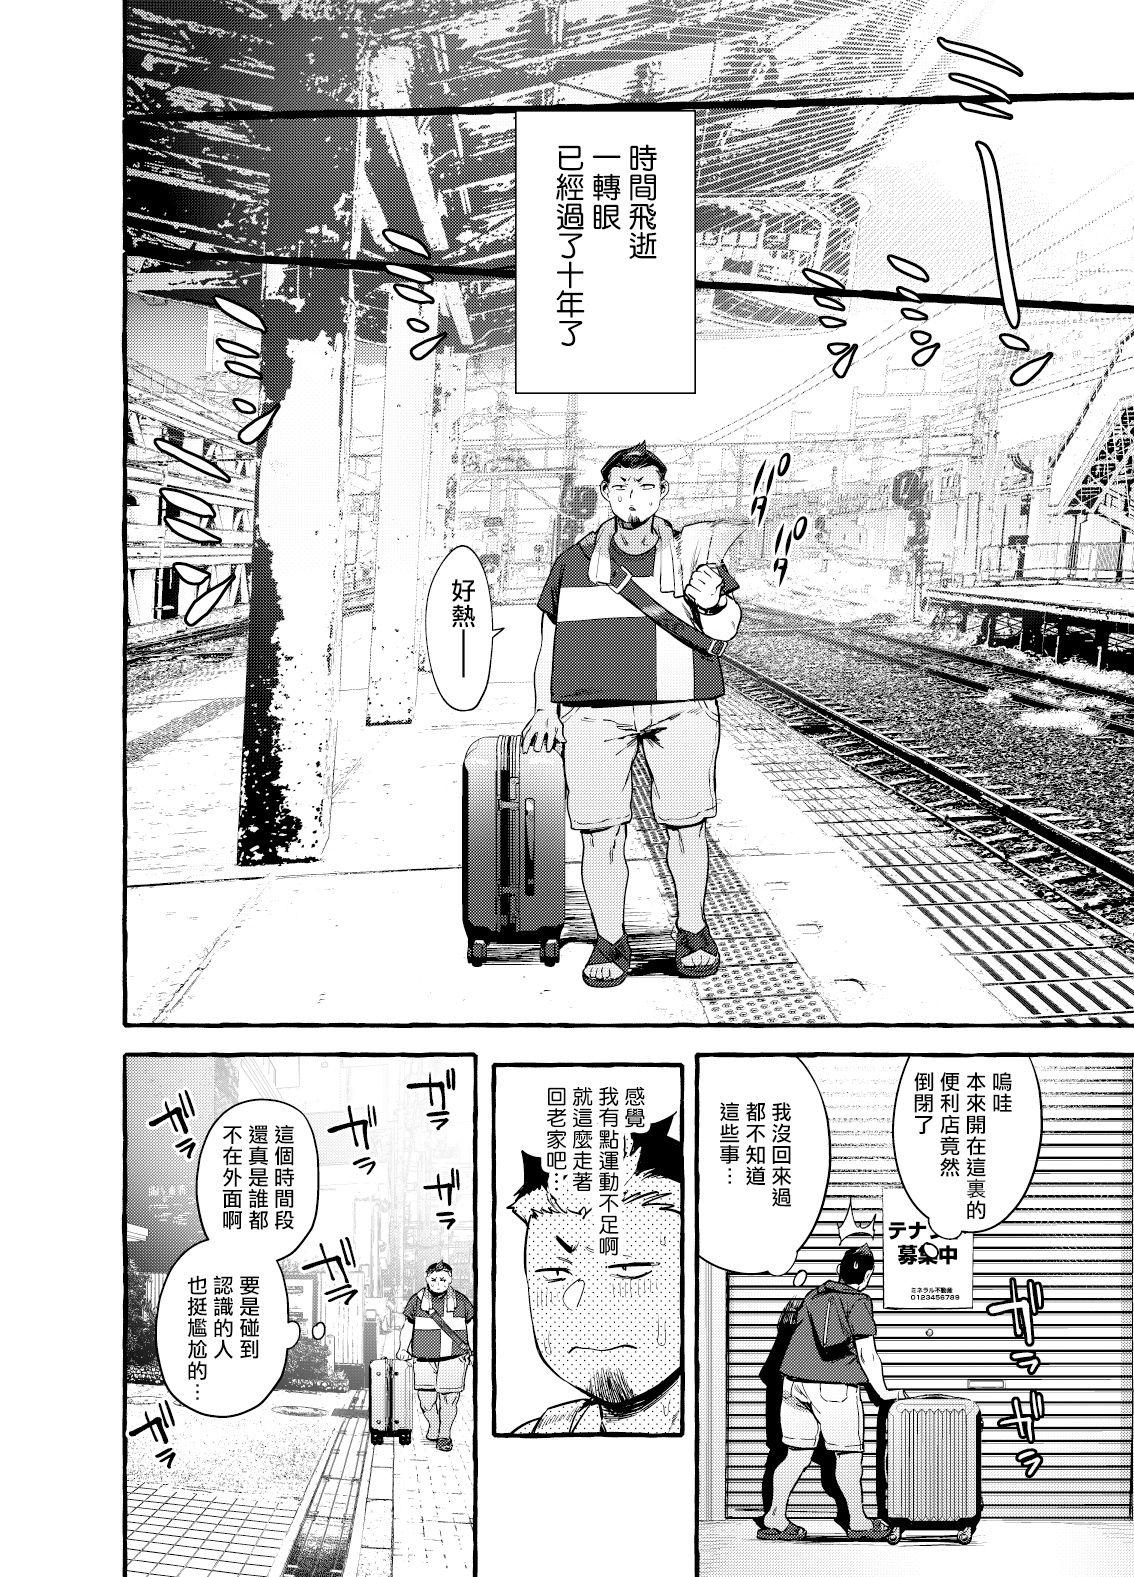 Canadian Tomodachi Kan | 奸男性朋友 Audition - Page 5